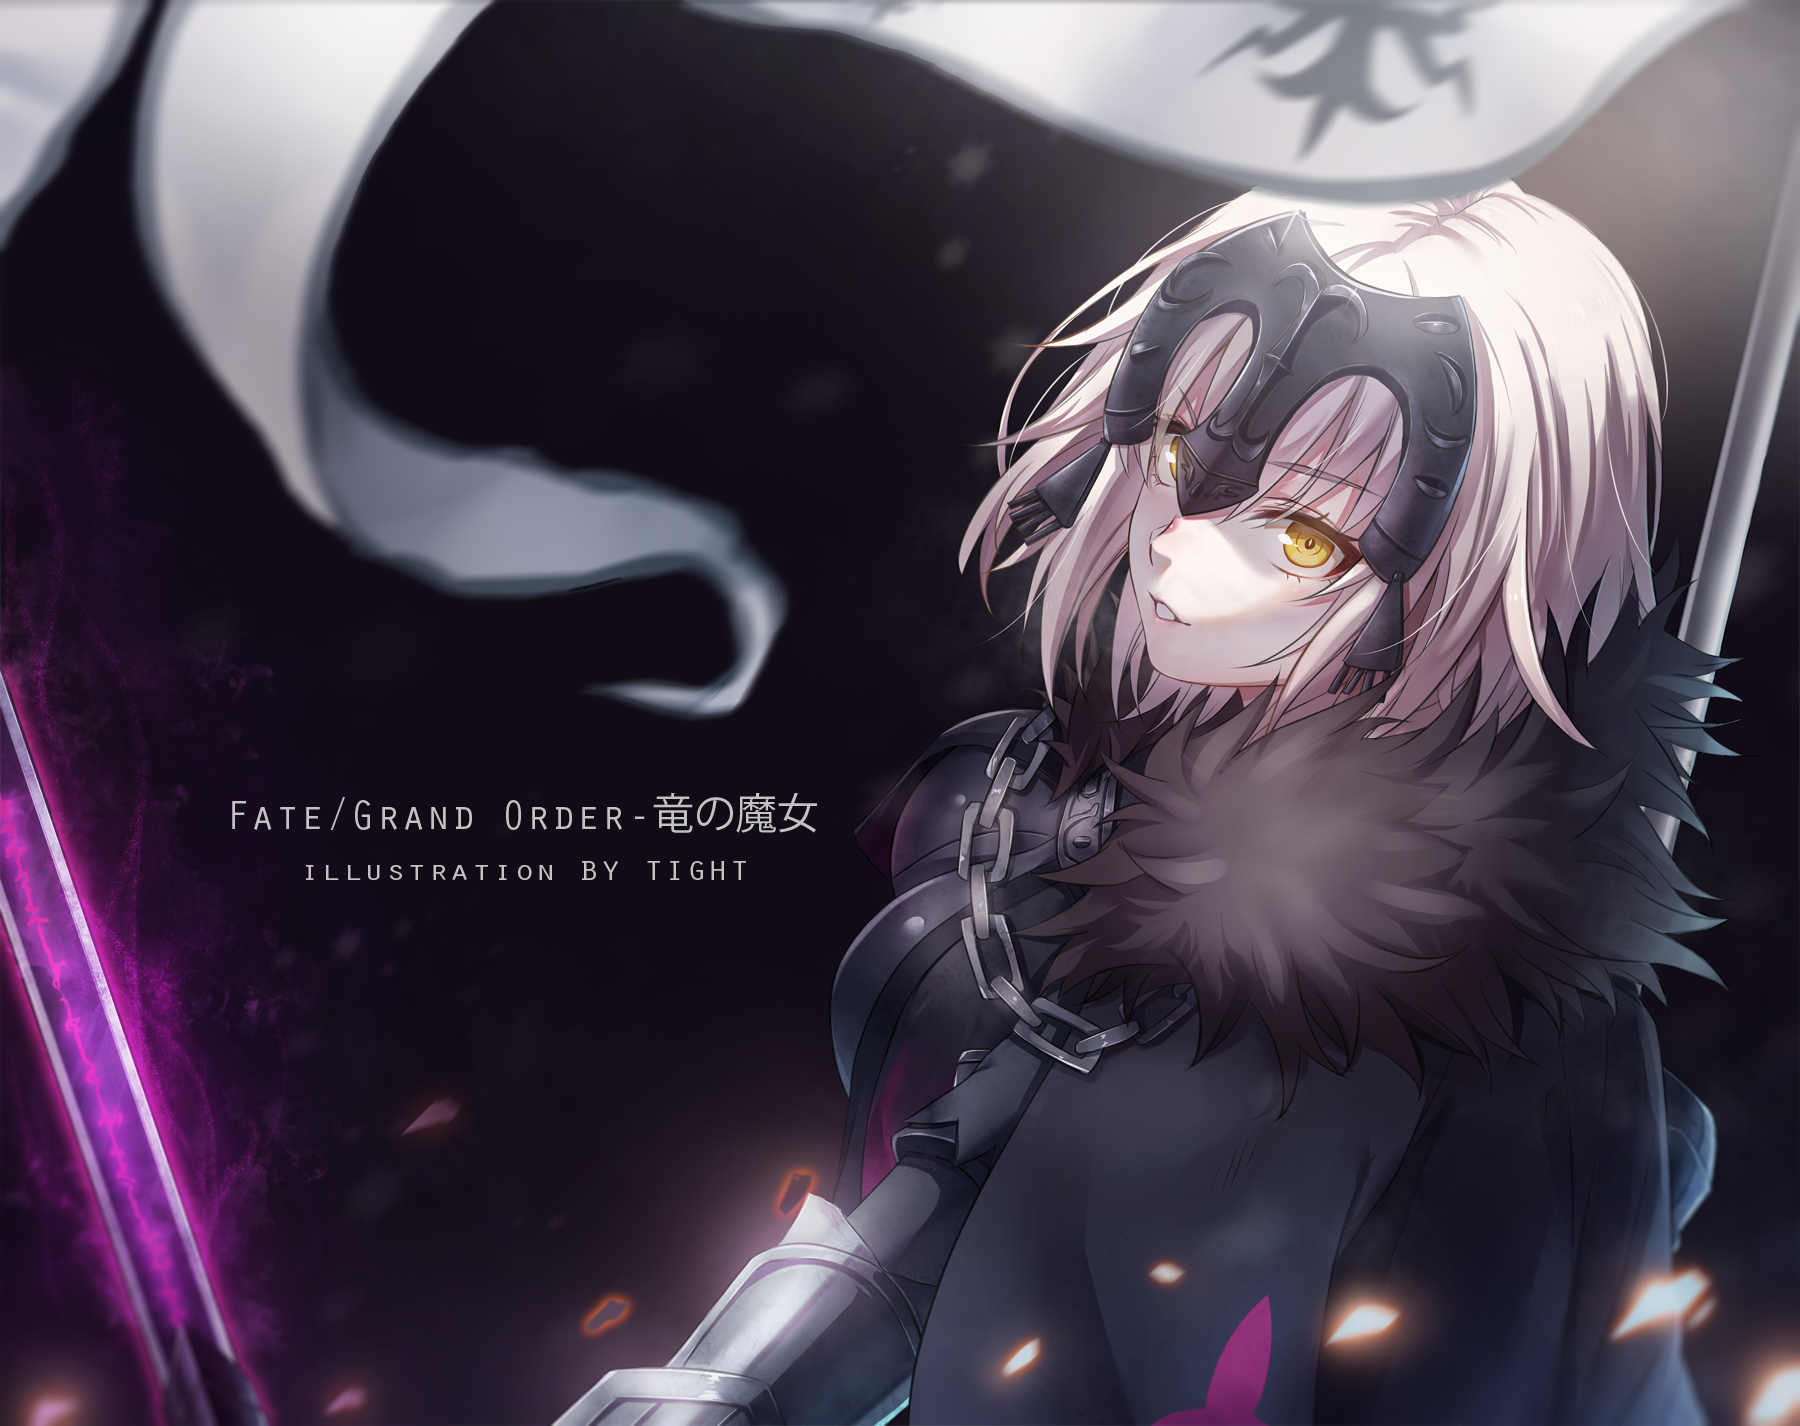 Fate/Grand Order Wallpaper by TIGHT